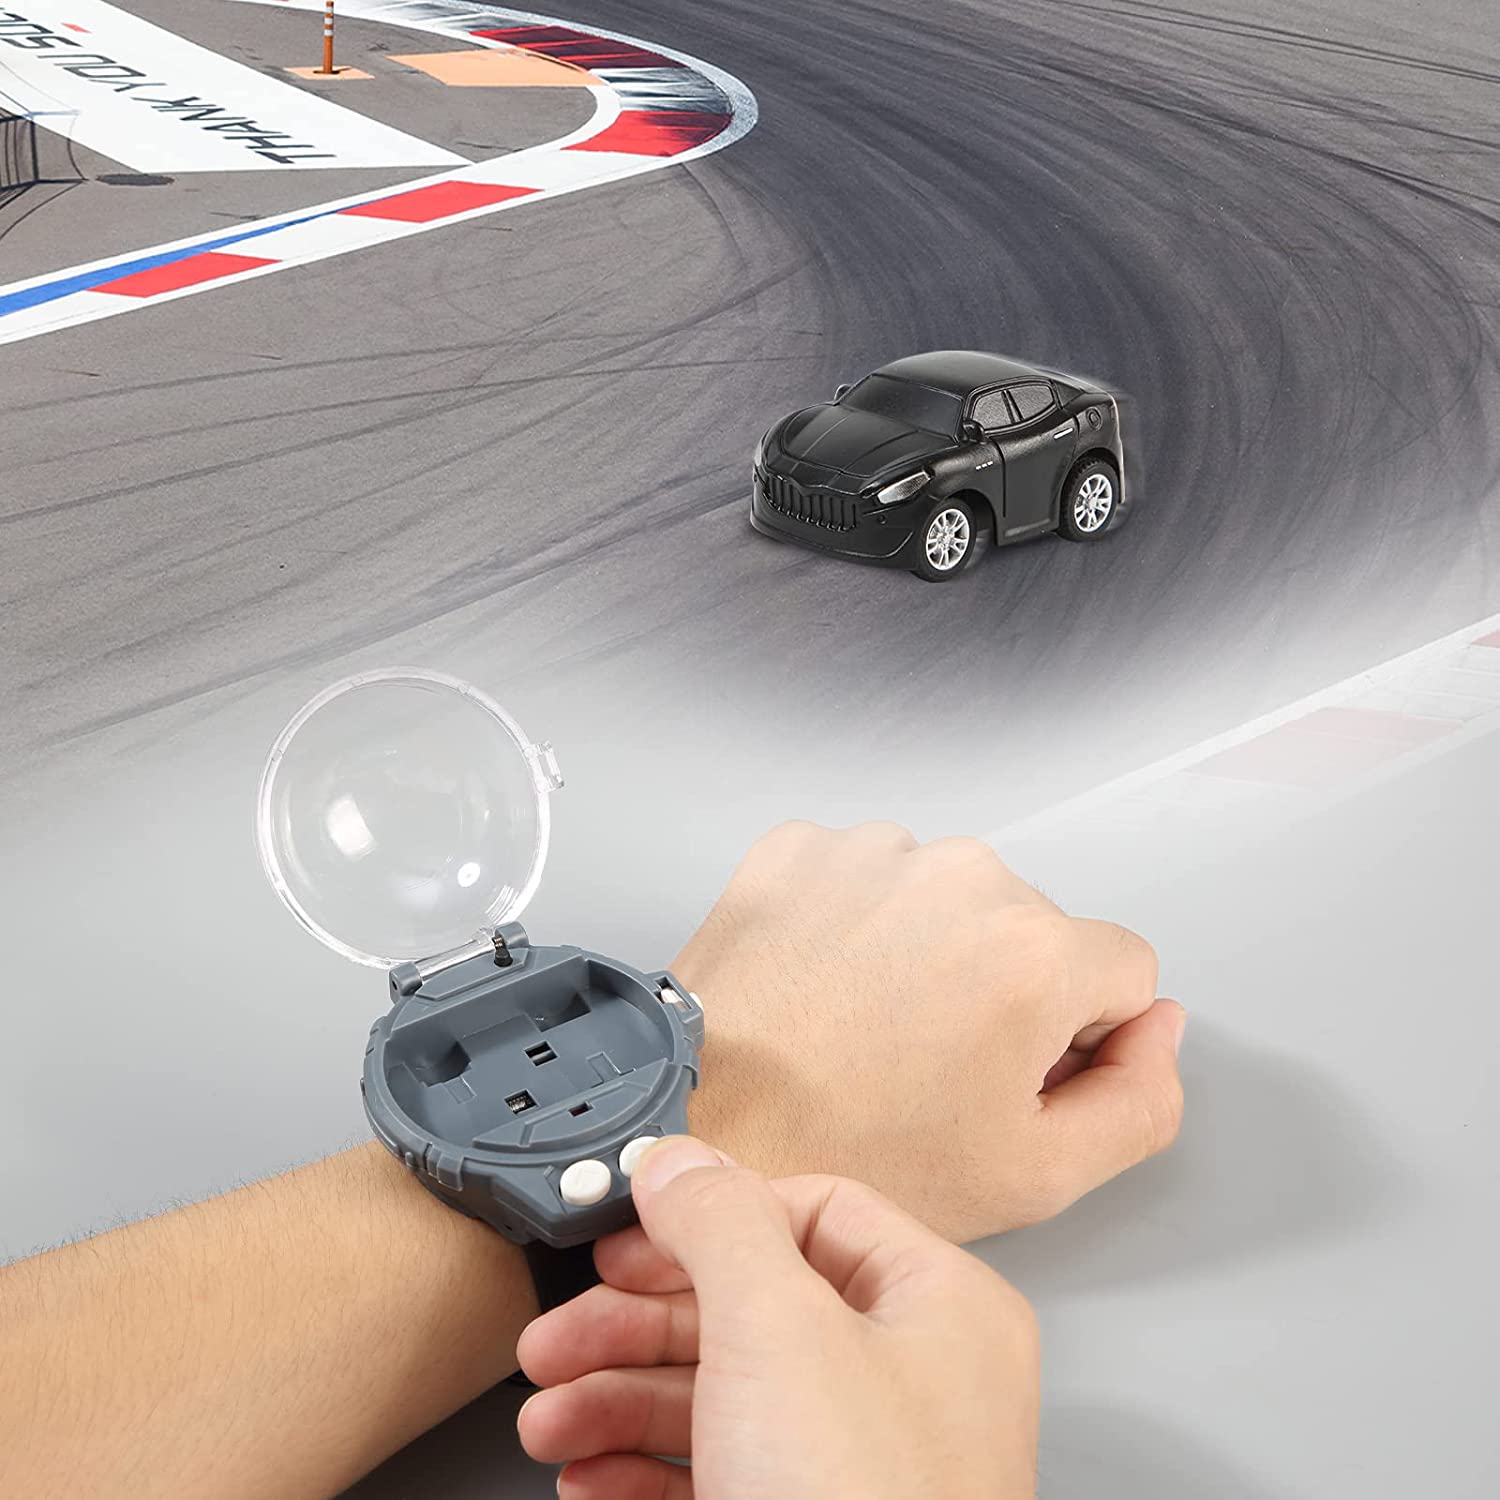 Mini Alloy RC Racing Card Hand Band Toy